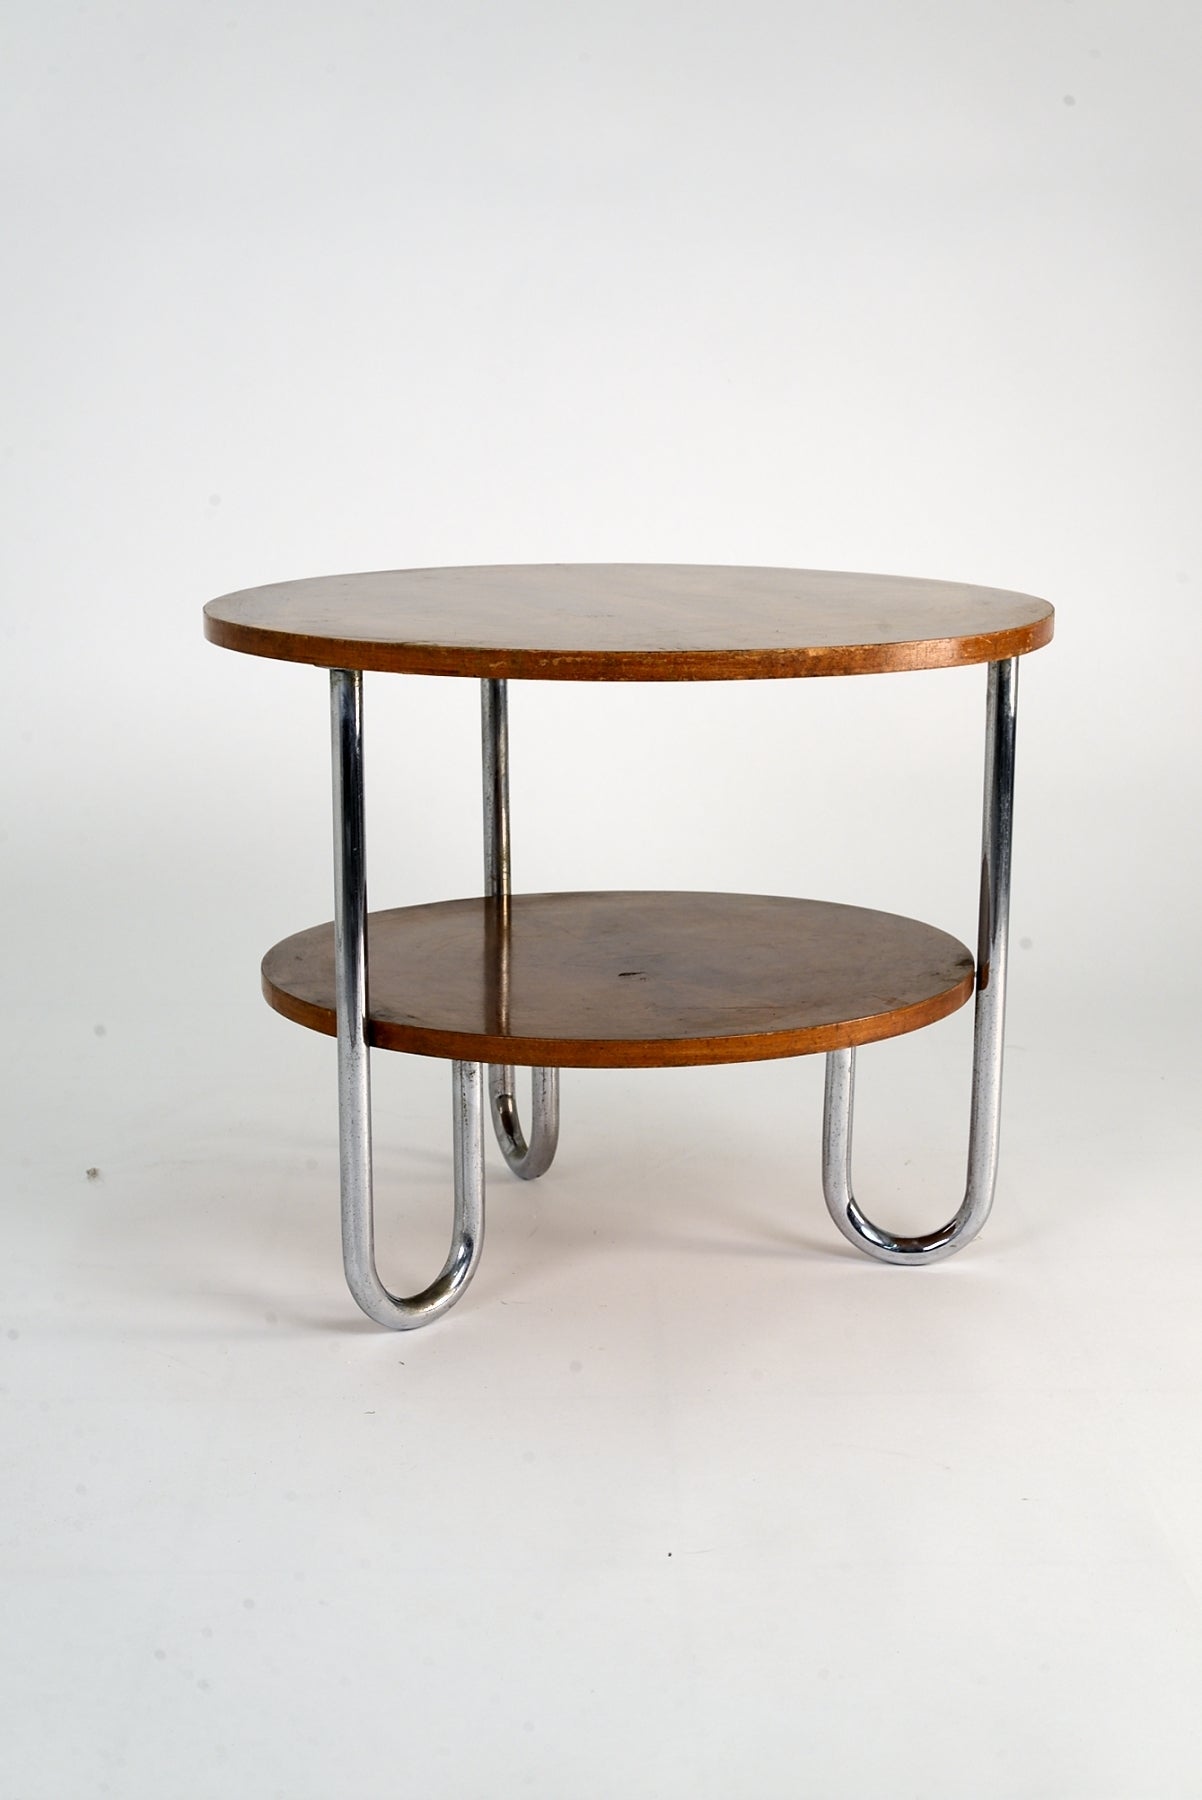 Italian Rationalist coffee table by Columbus, Milan, '30s